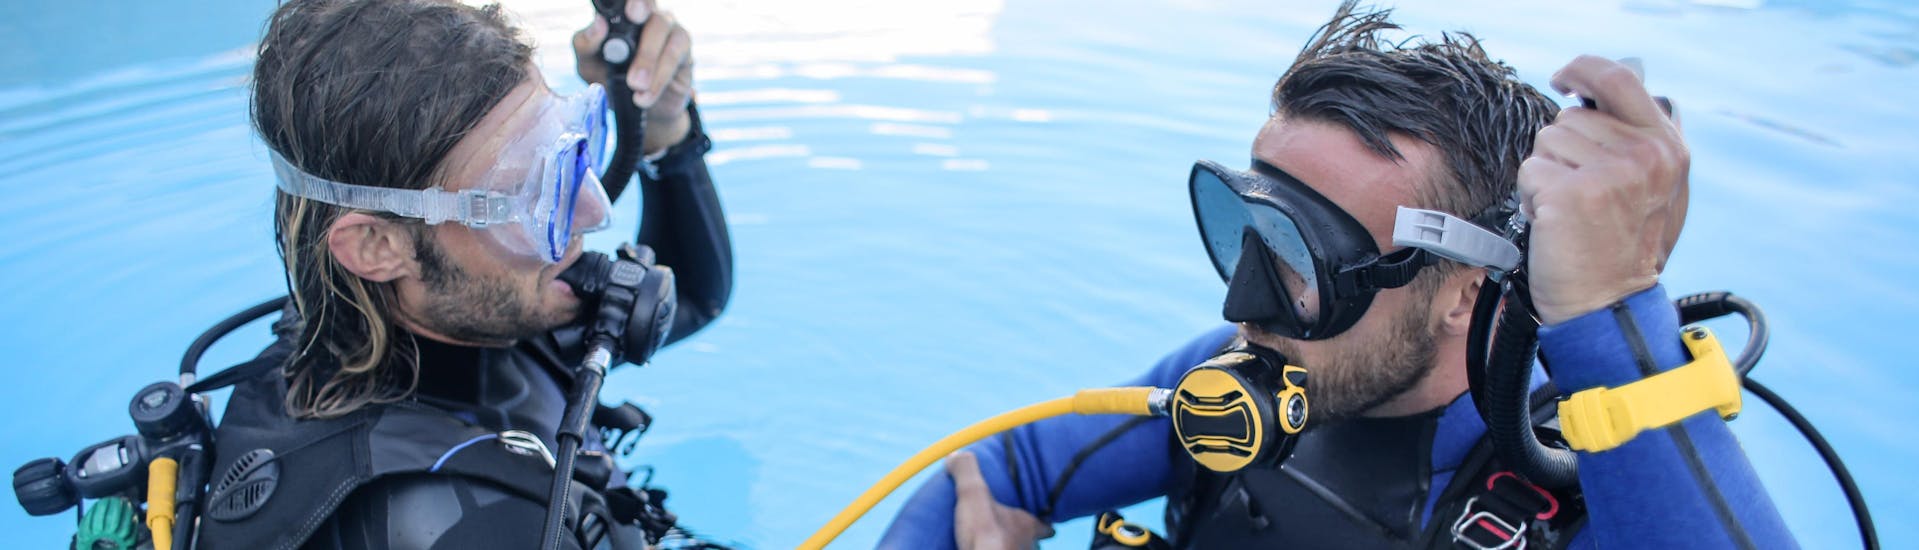 As part of the Discover Scuba Diving programme, a diving instructor is teaching a student how to use their scuba gear in a swimming pool.